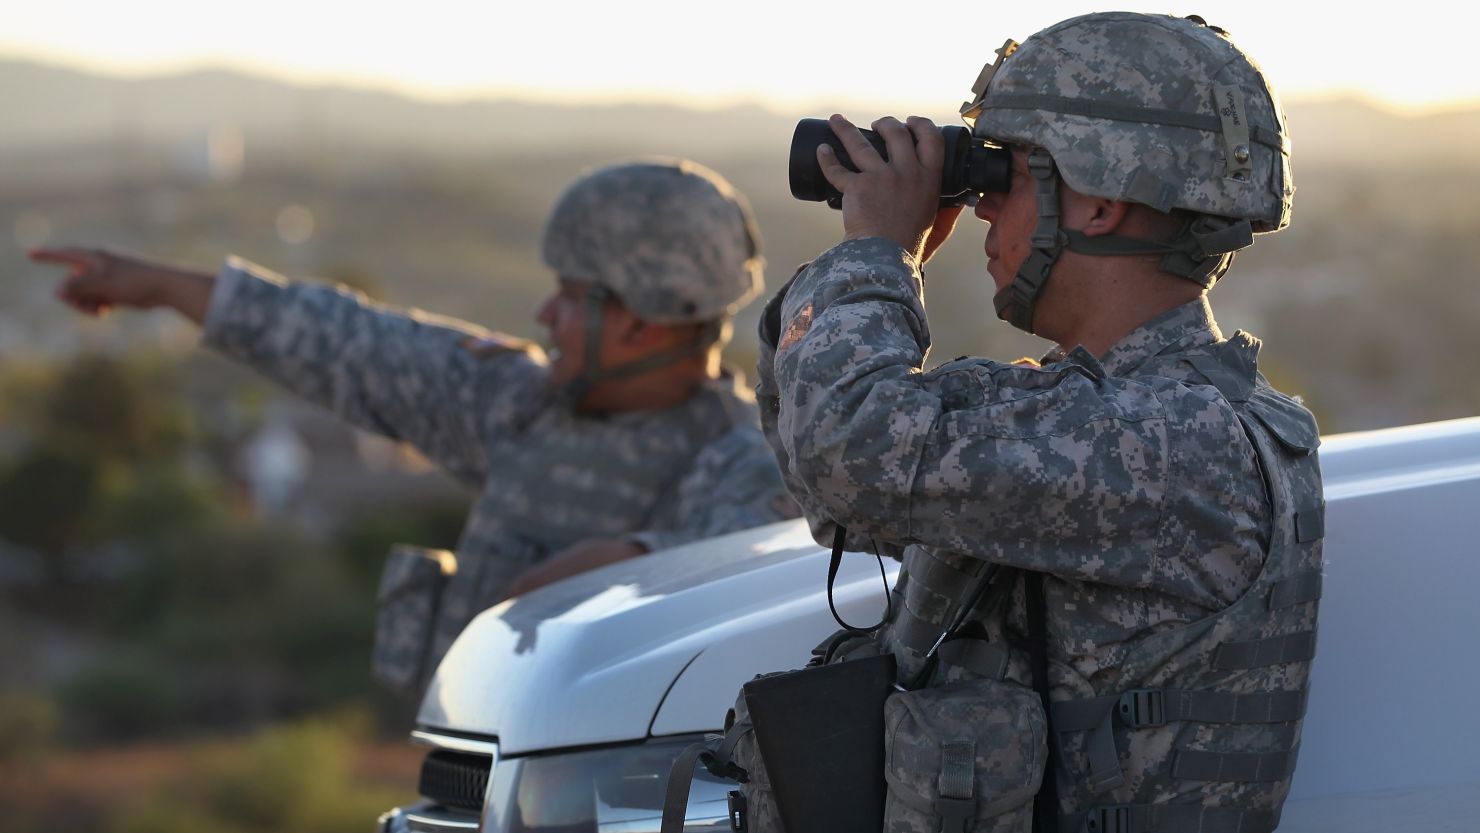 The Department of Homeland Security plans to cut National Guard troops at the Mexican border by 75%, sources say.